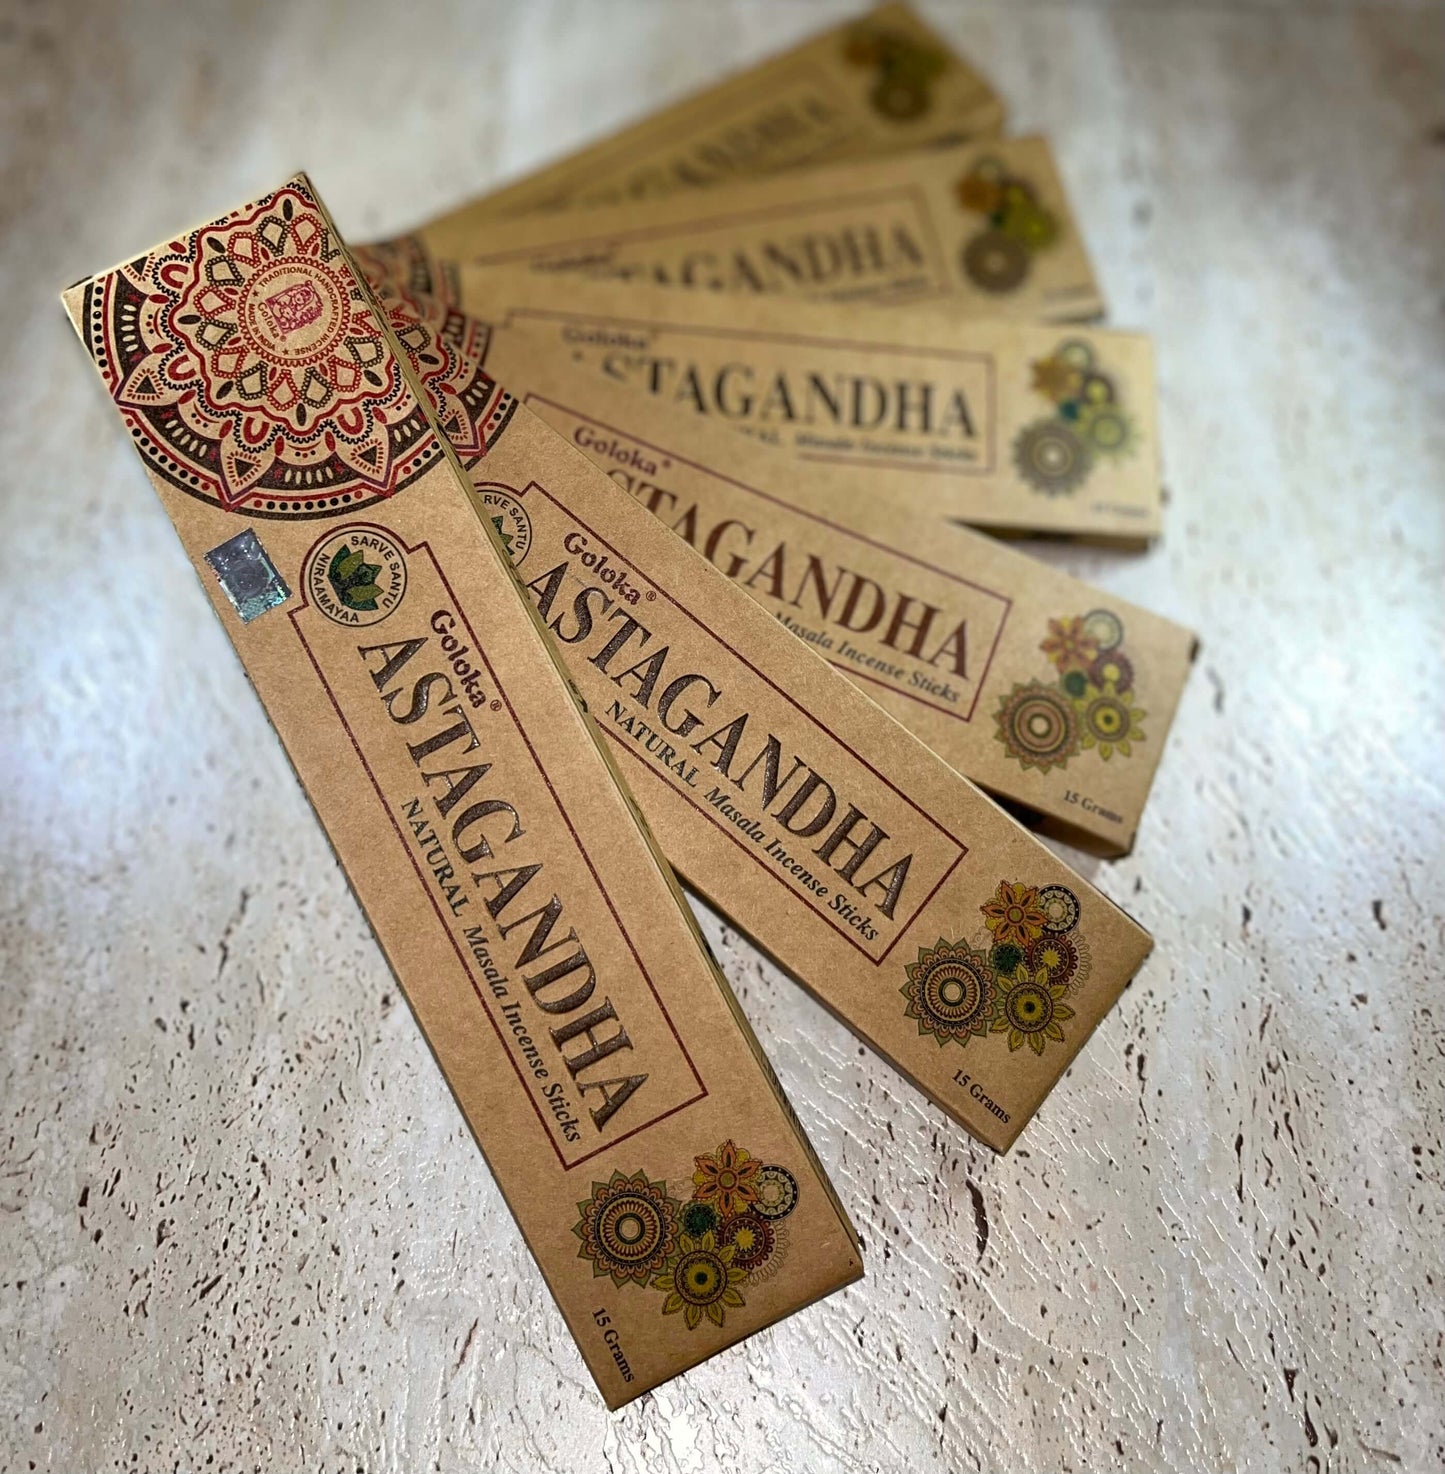 goloka organic incense sticks india astagandha australian hand-made hand made rolled hand-rolled organic-incense packet 15g